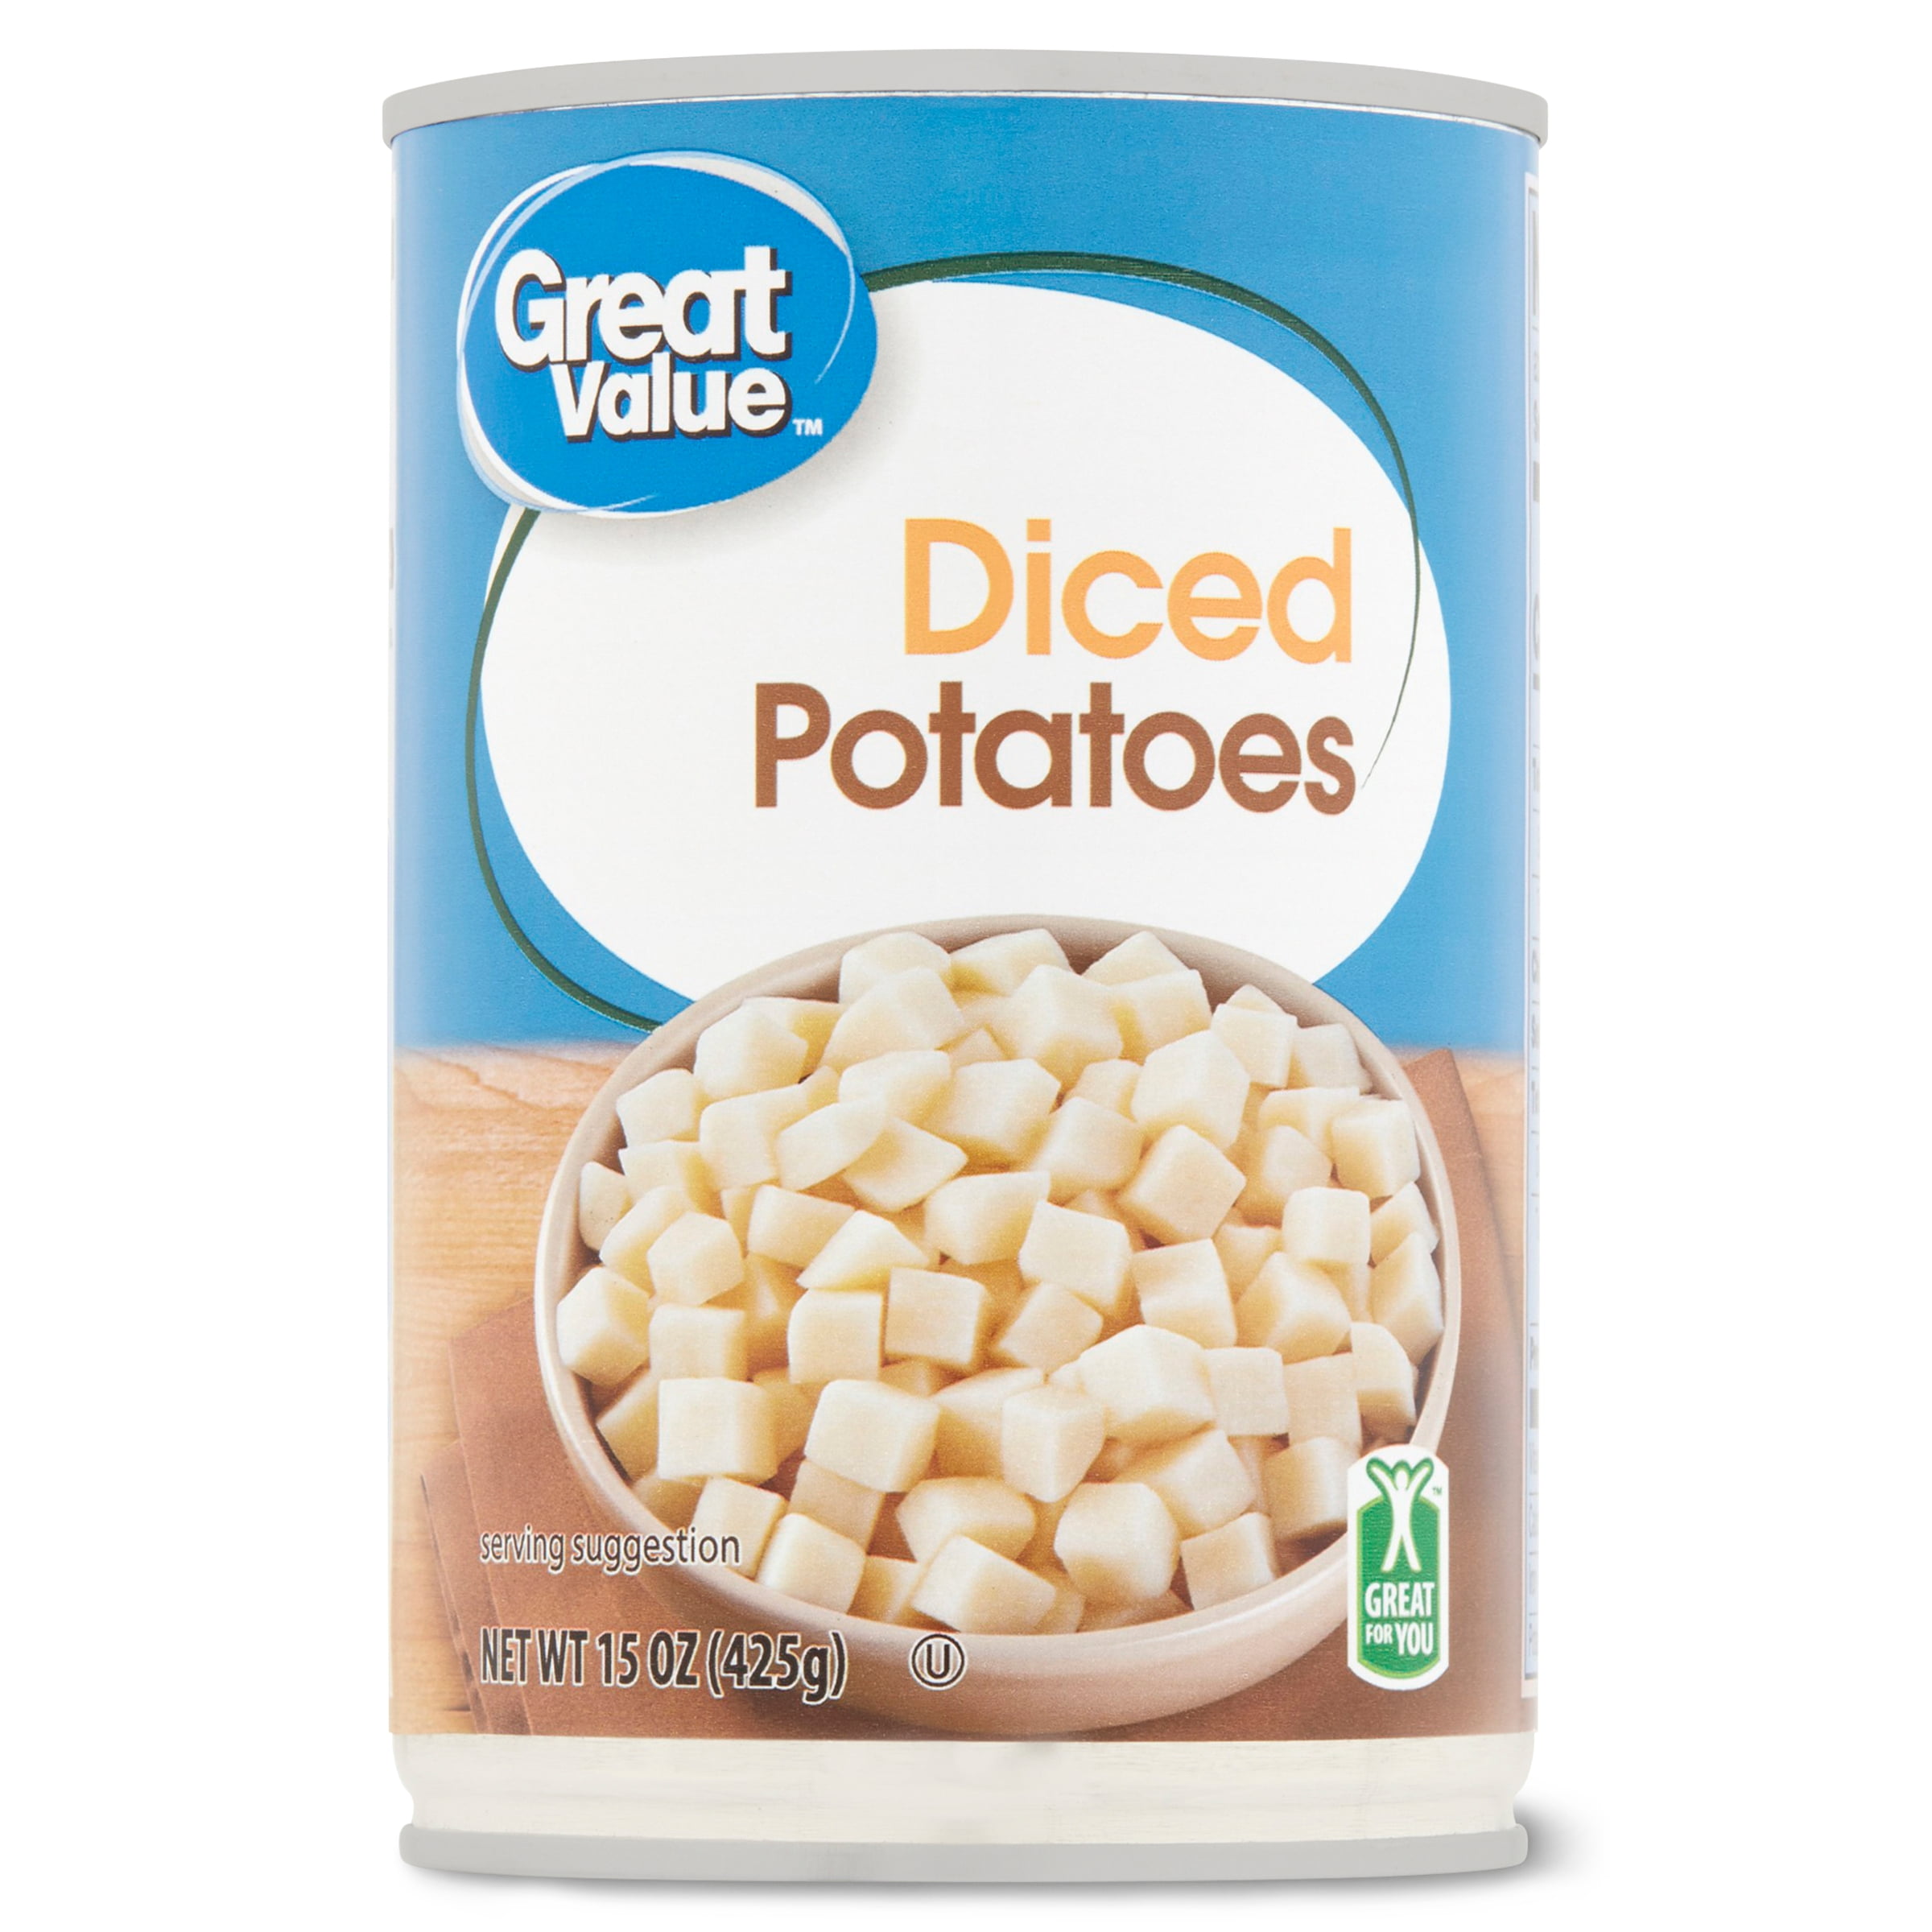 Great Value Canned Diced Potatoes, 15 oz